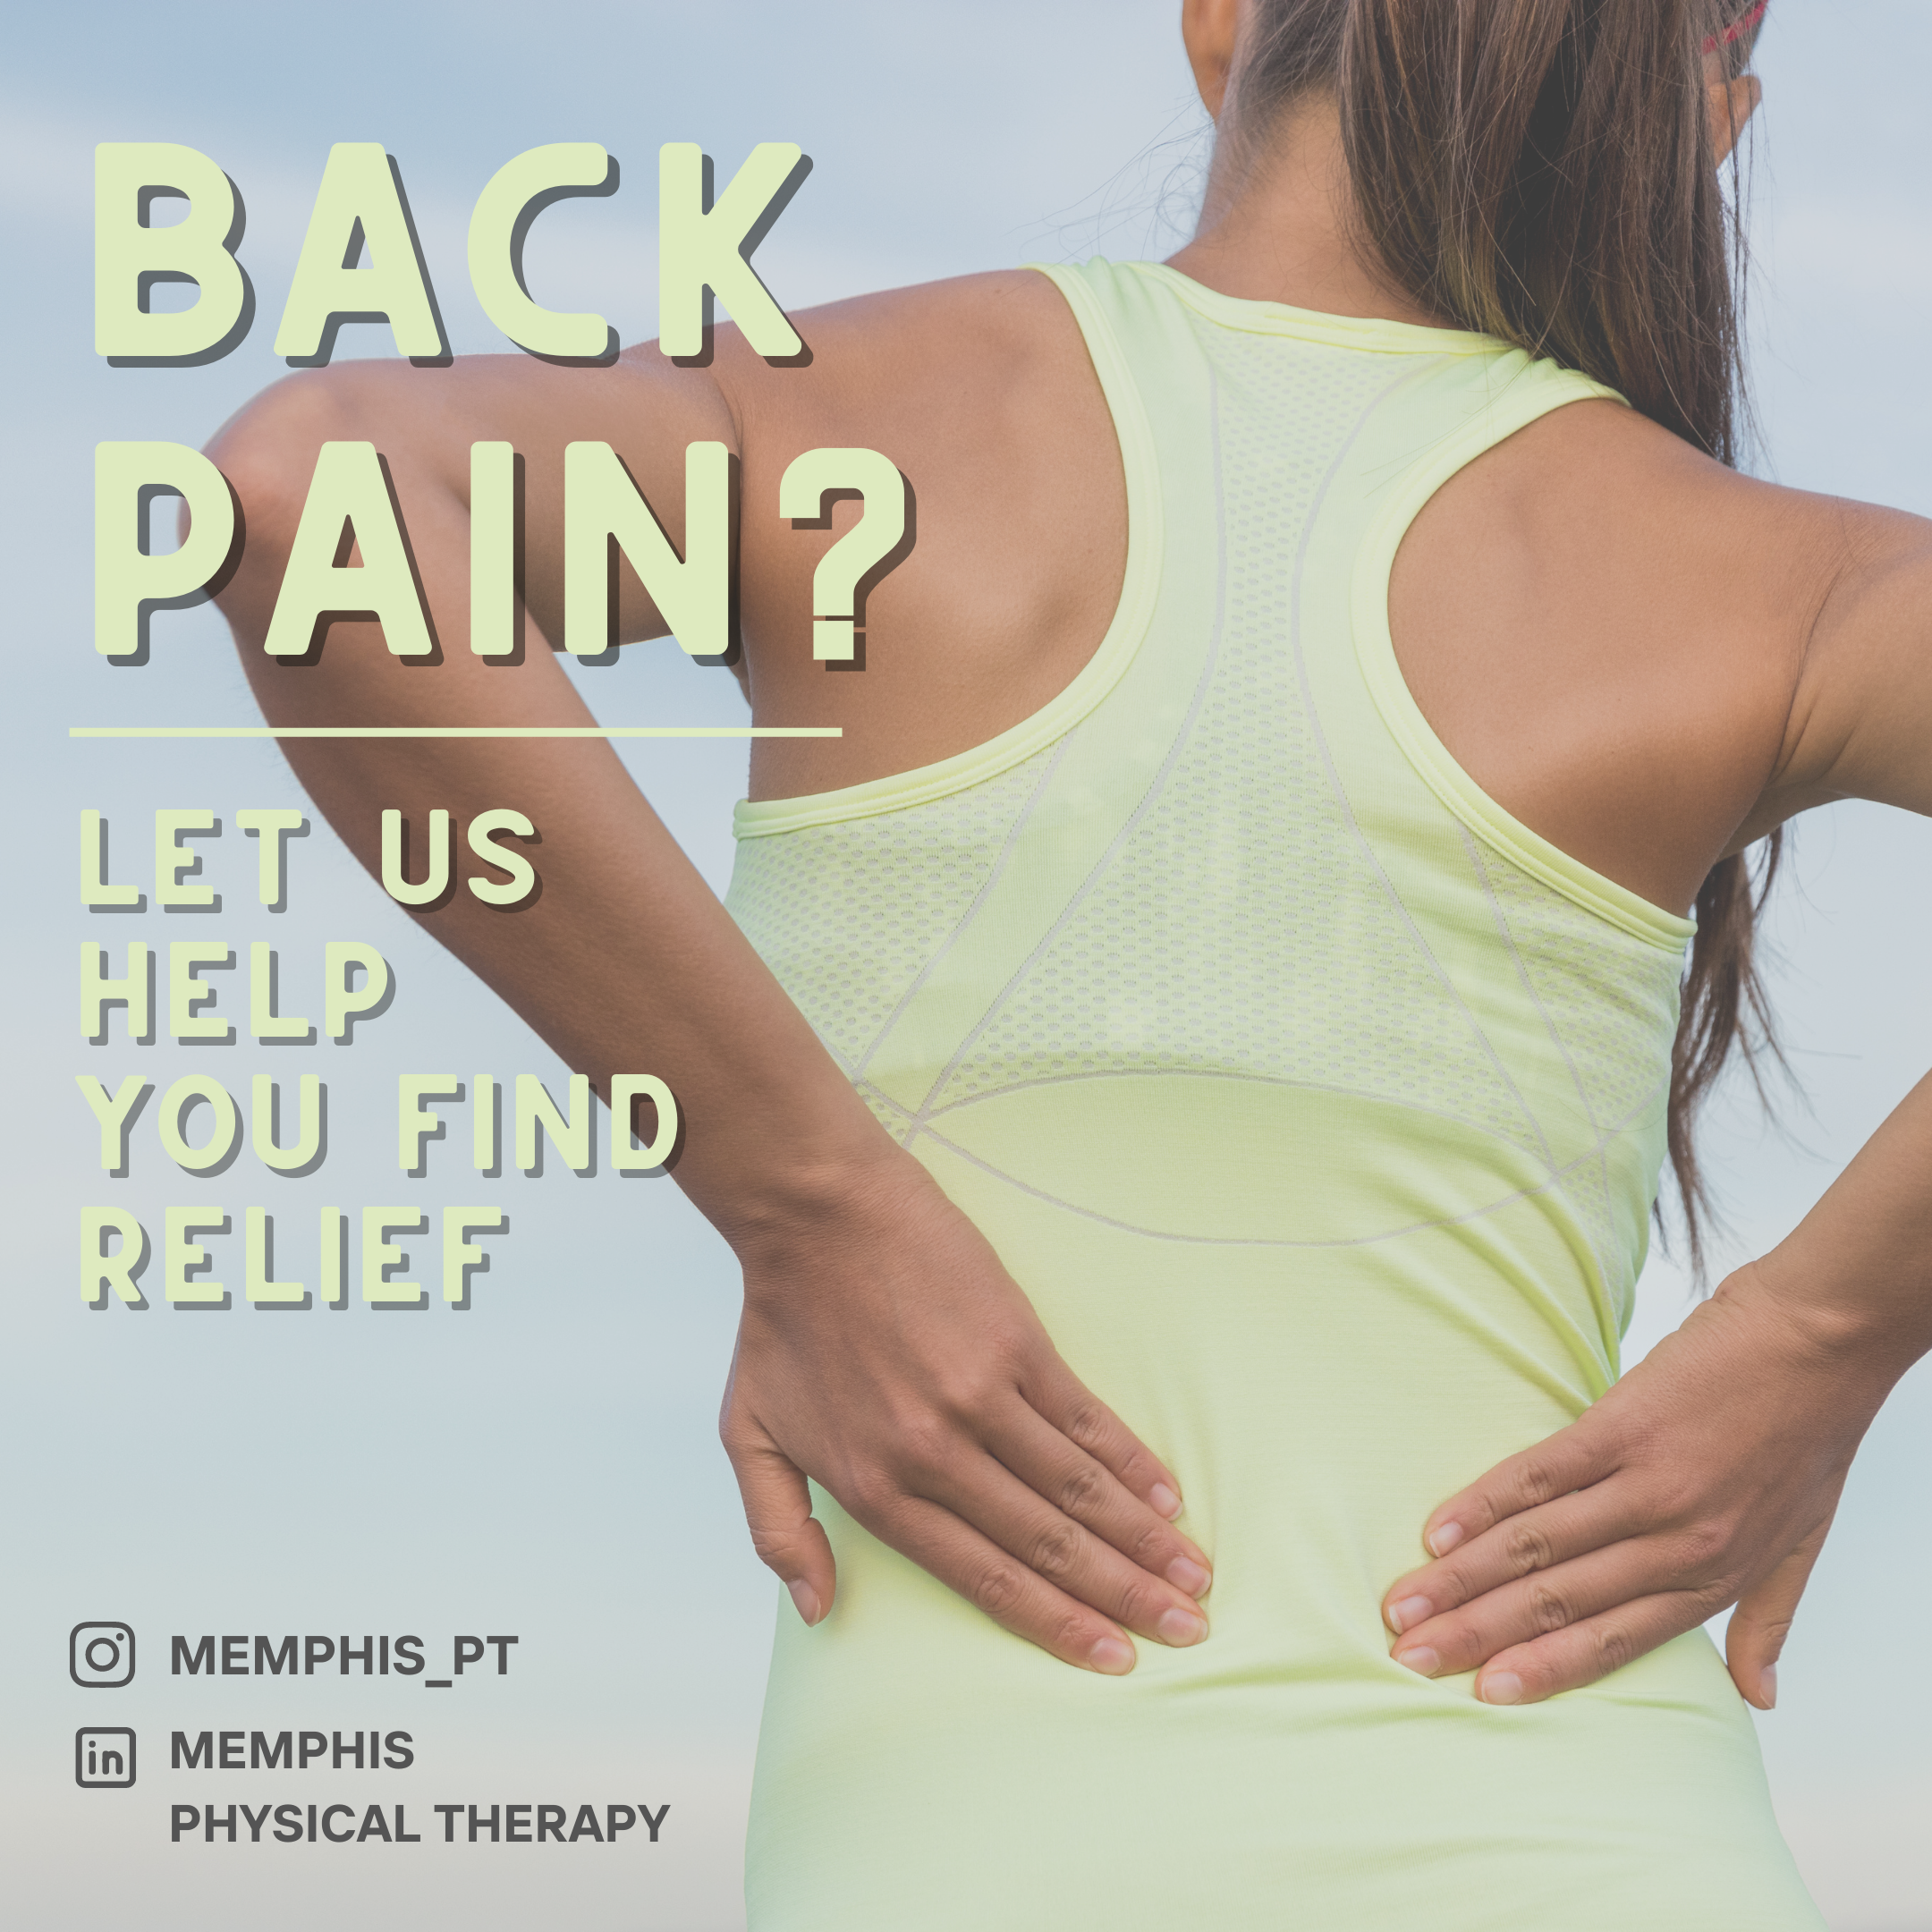 Back Pain: Relief with Piriformis Stretch - Memphis Physical Therapy